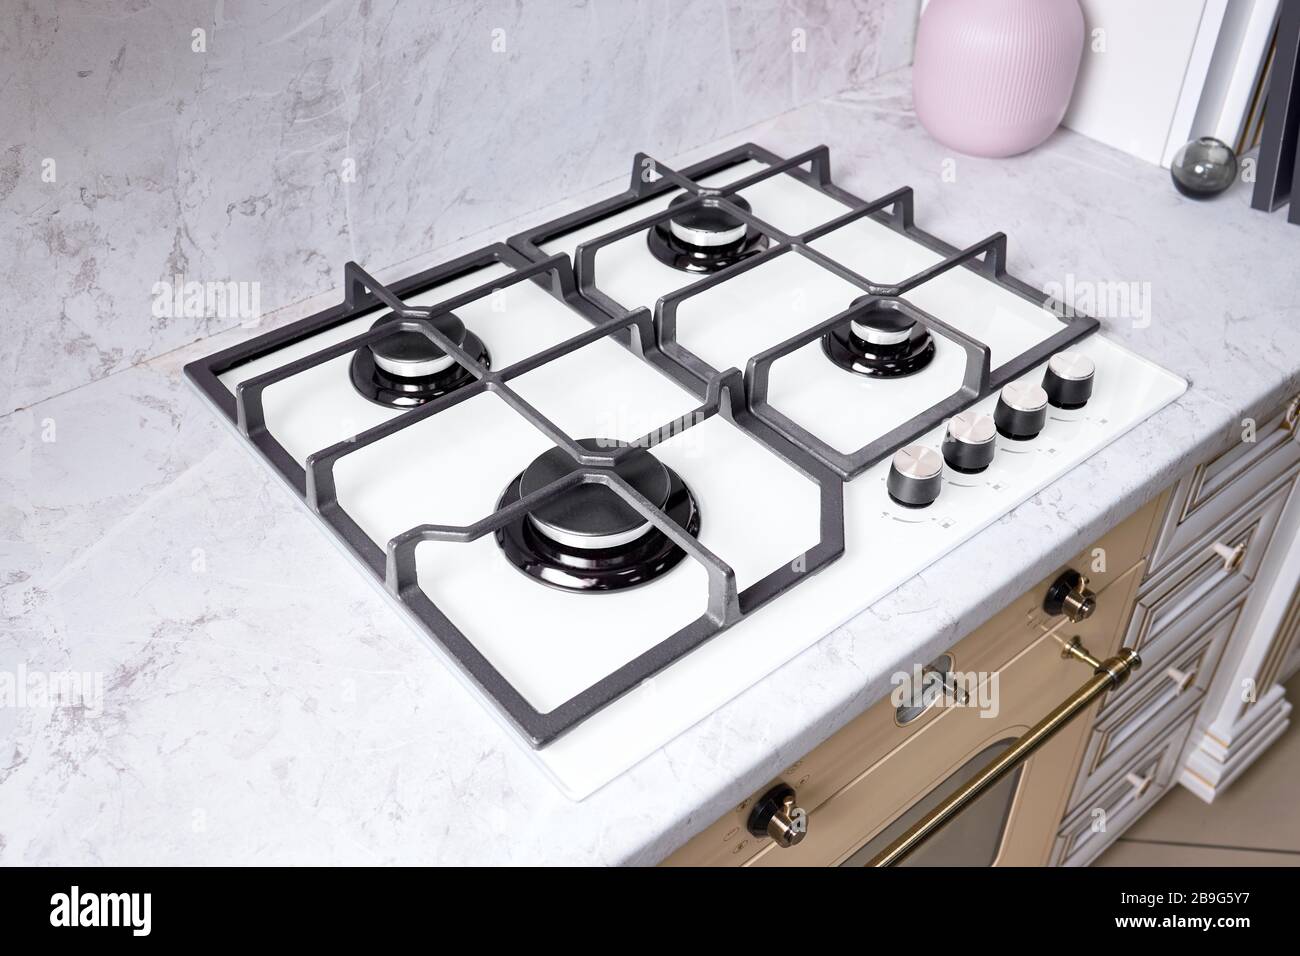 Modern Hob Gas Stove Made Of Tempered White Glass Using Natural